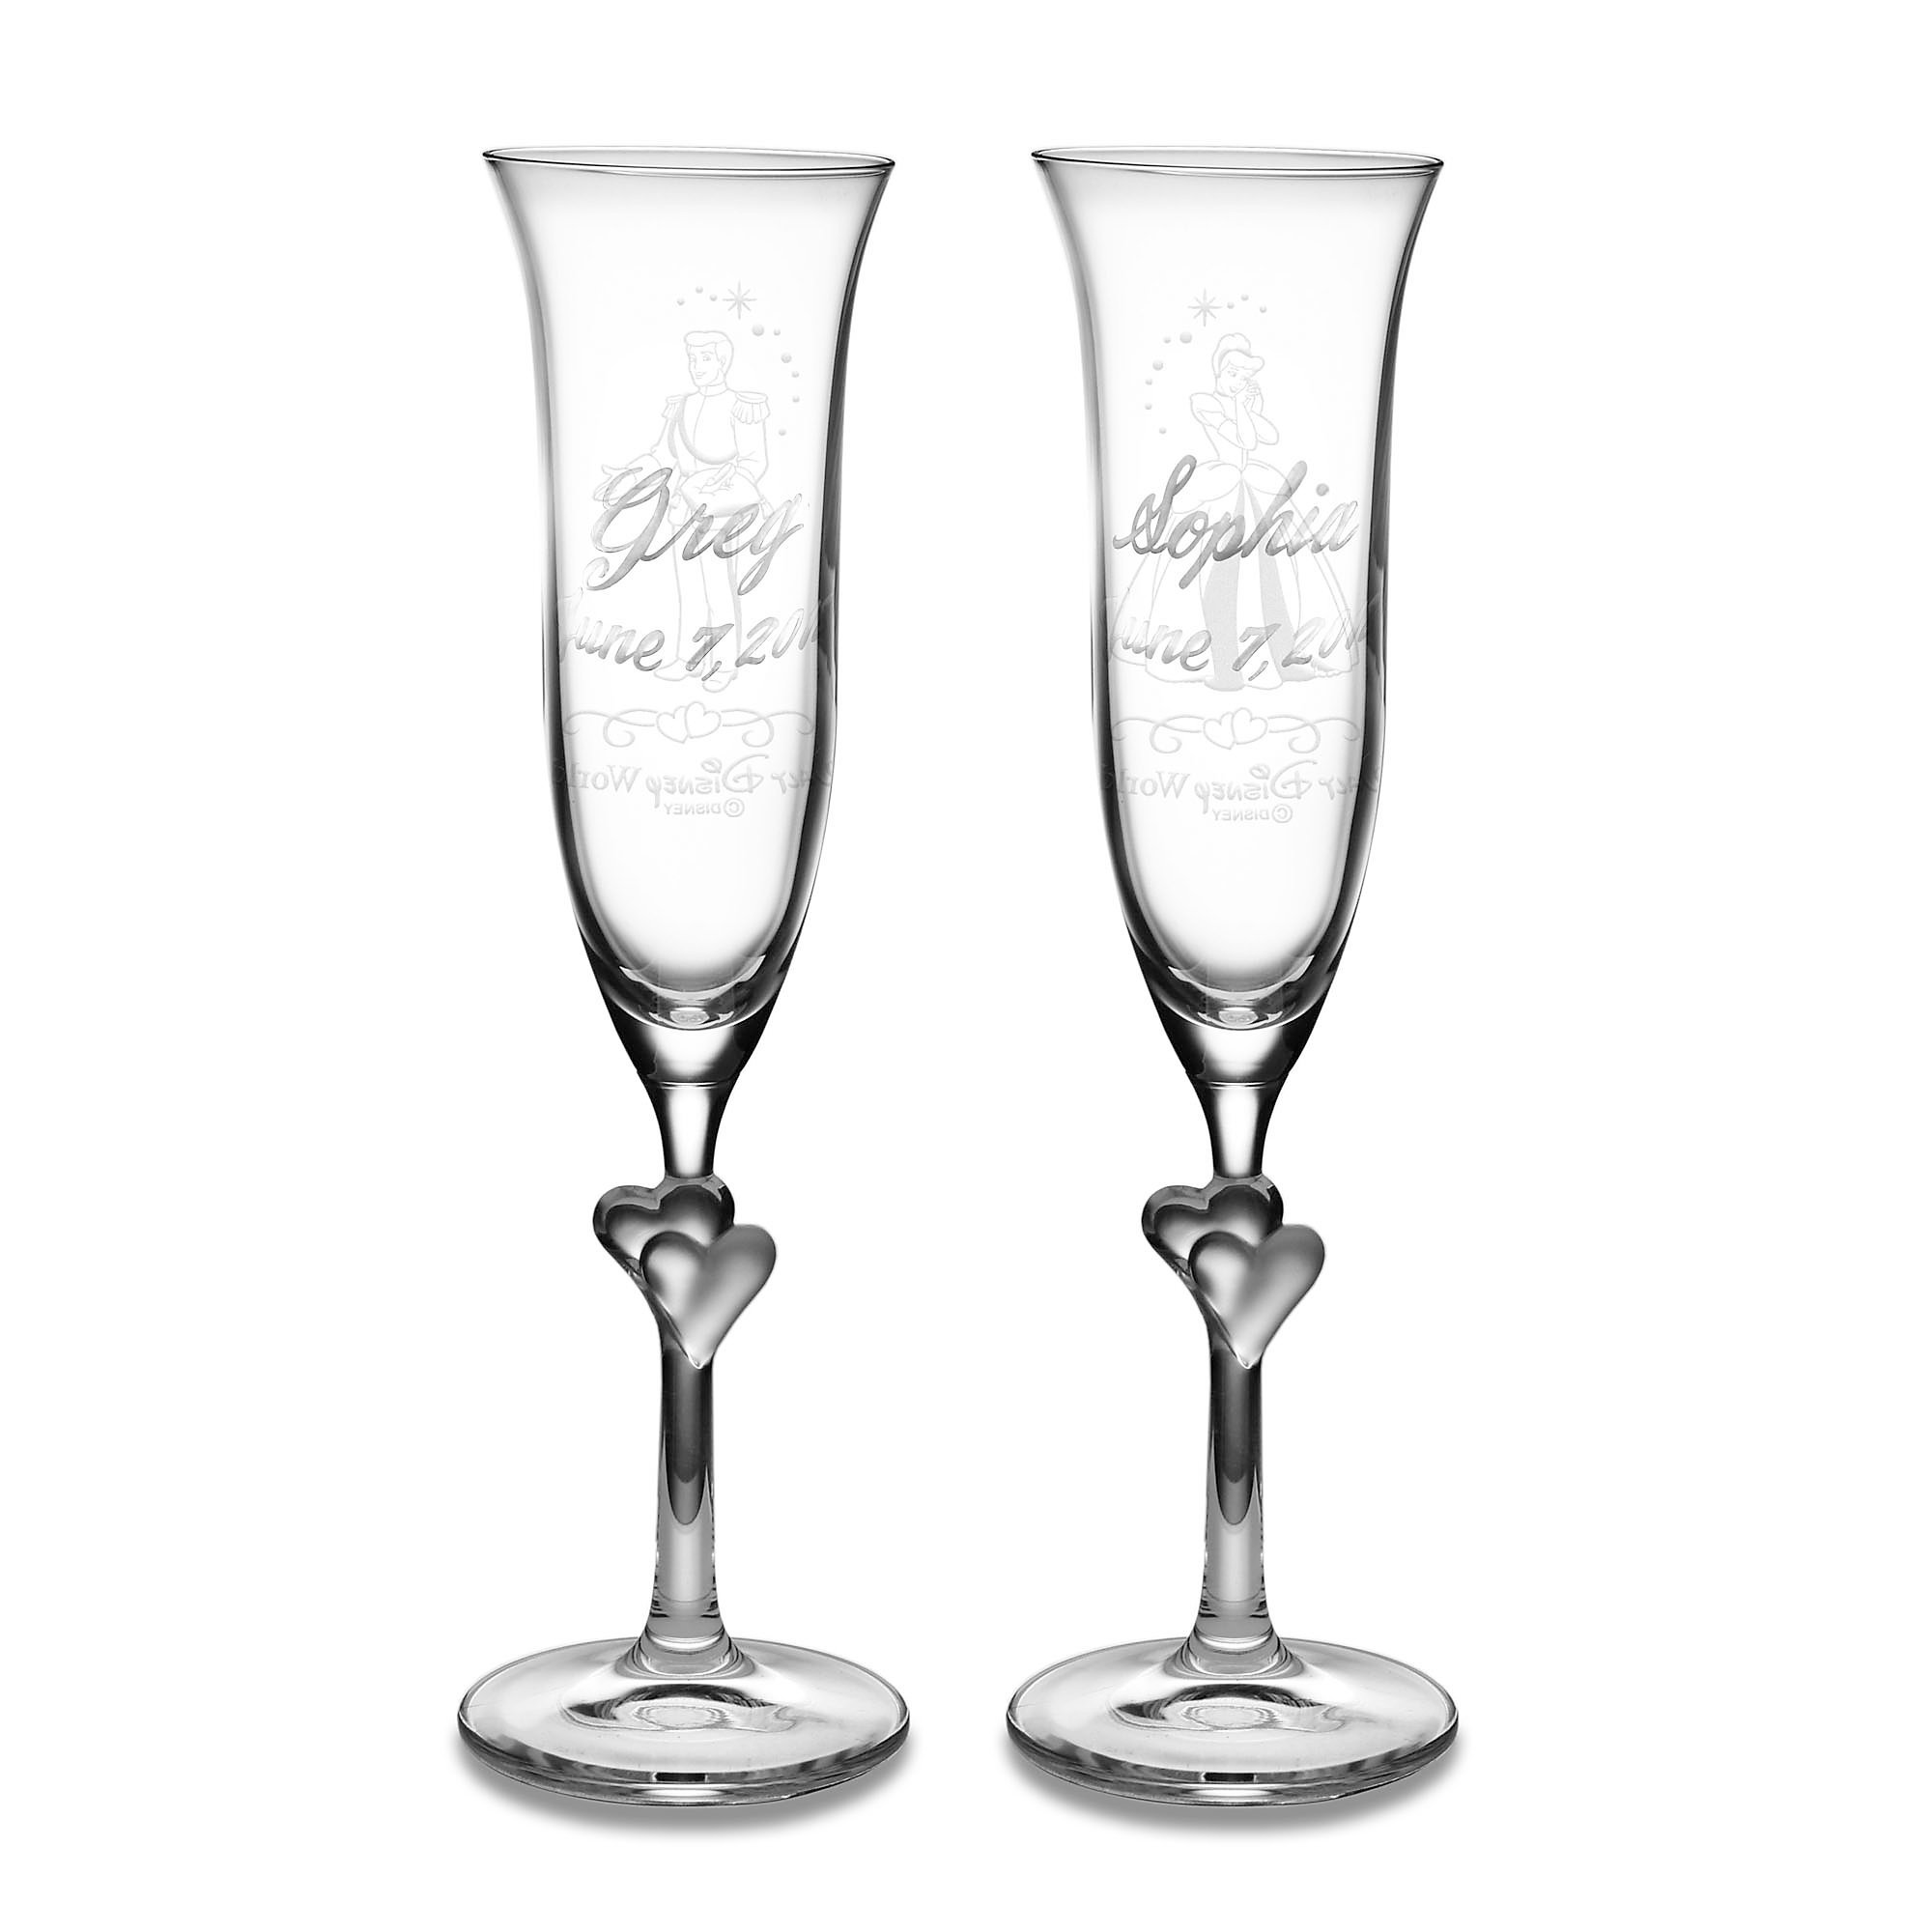 Cinderella and Prince Charming Glass Flute Set by Arribas - Personalizable